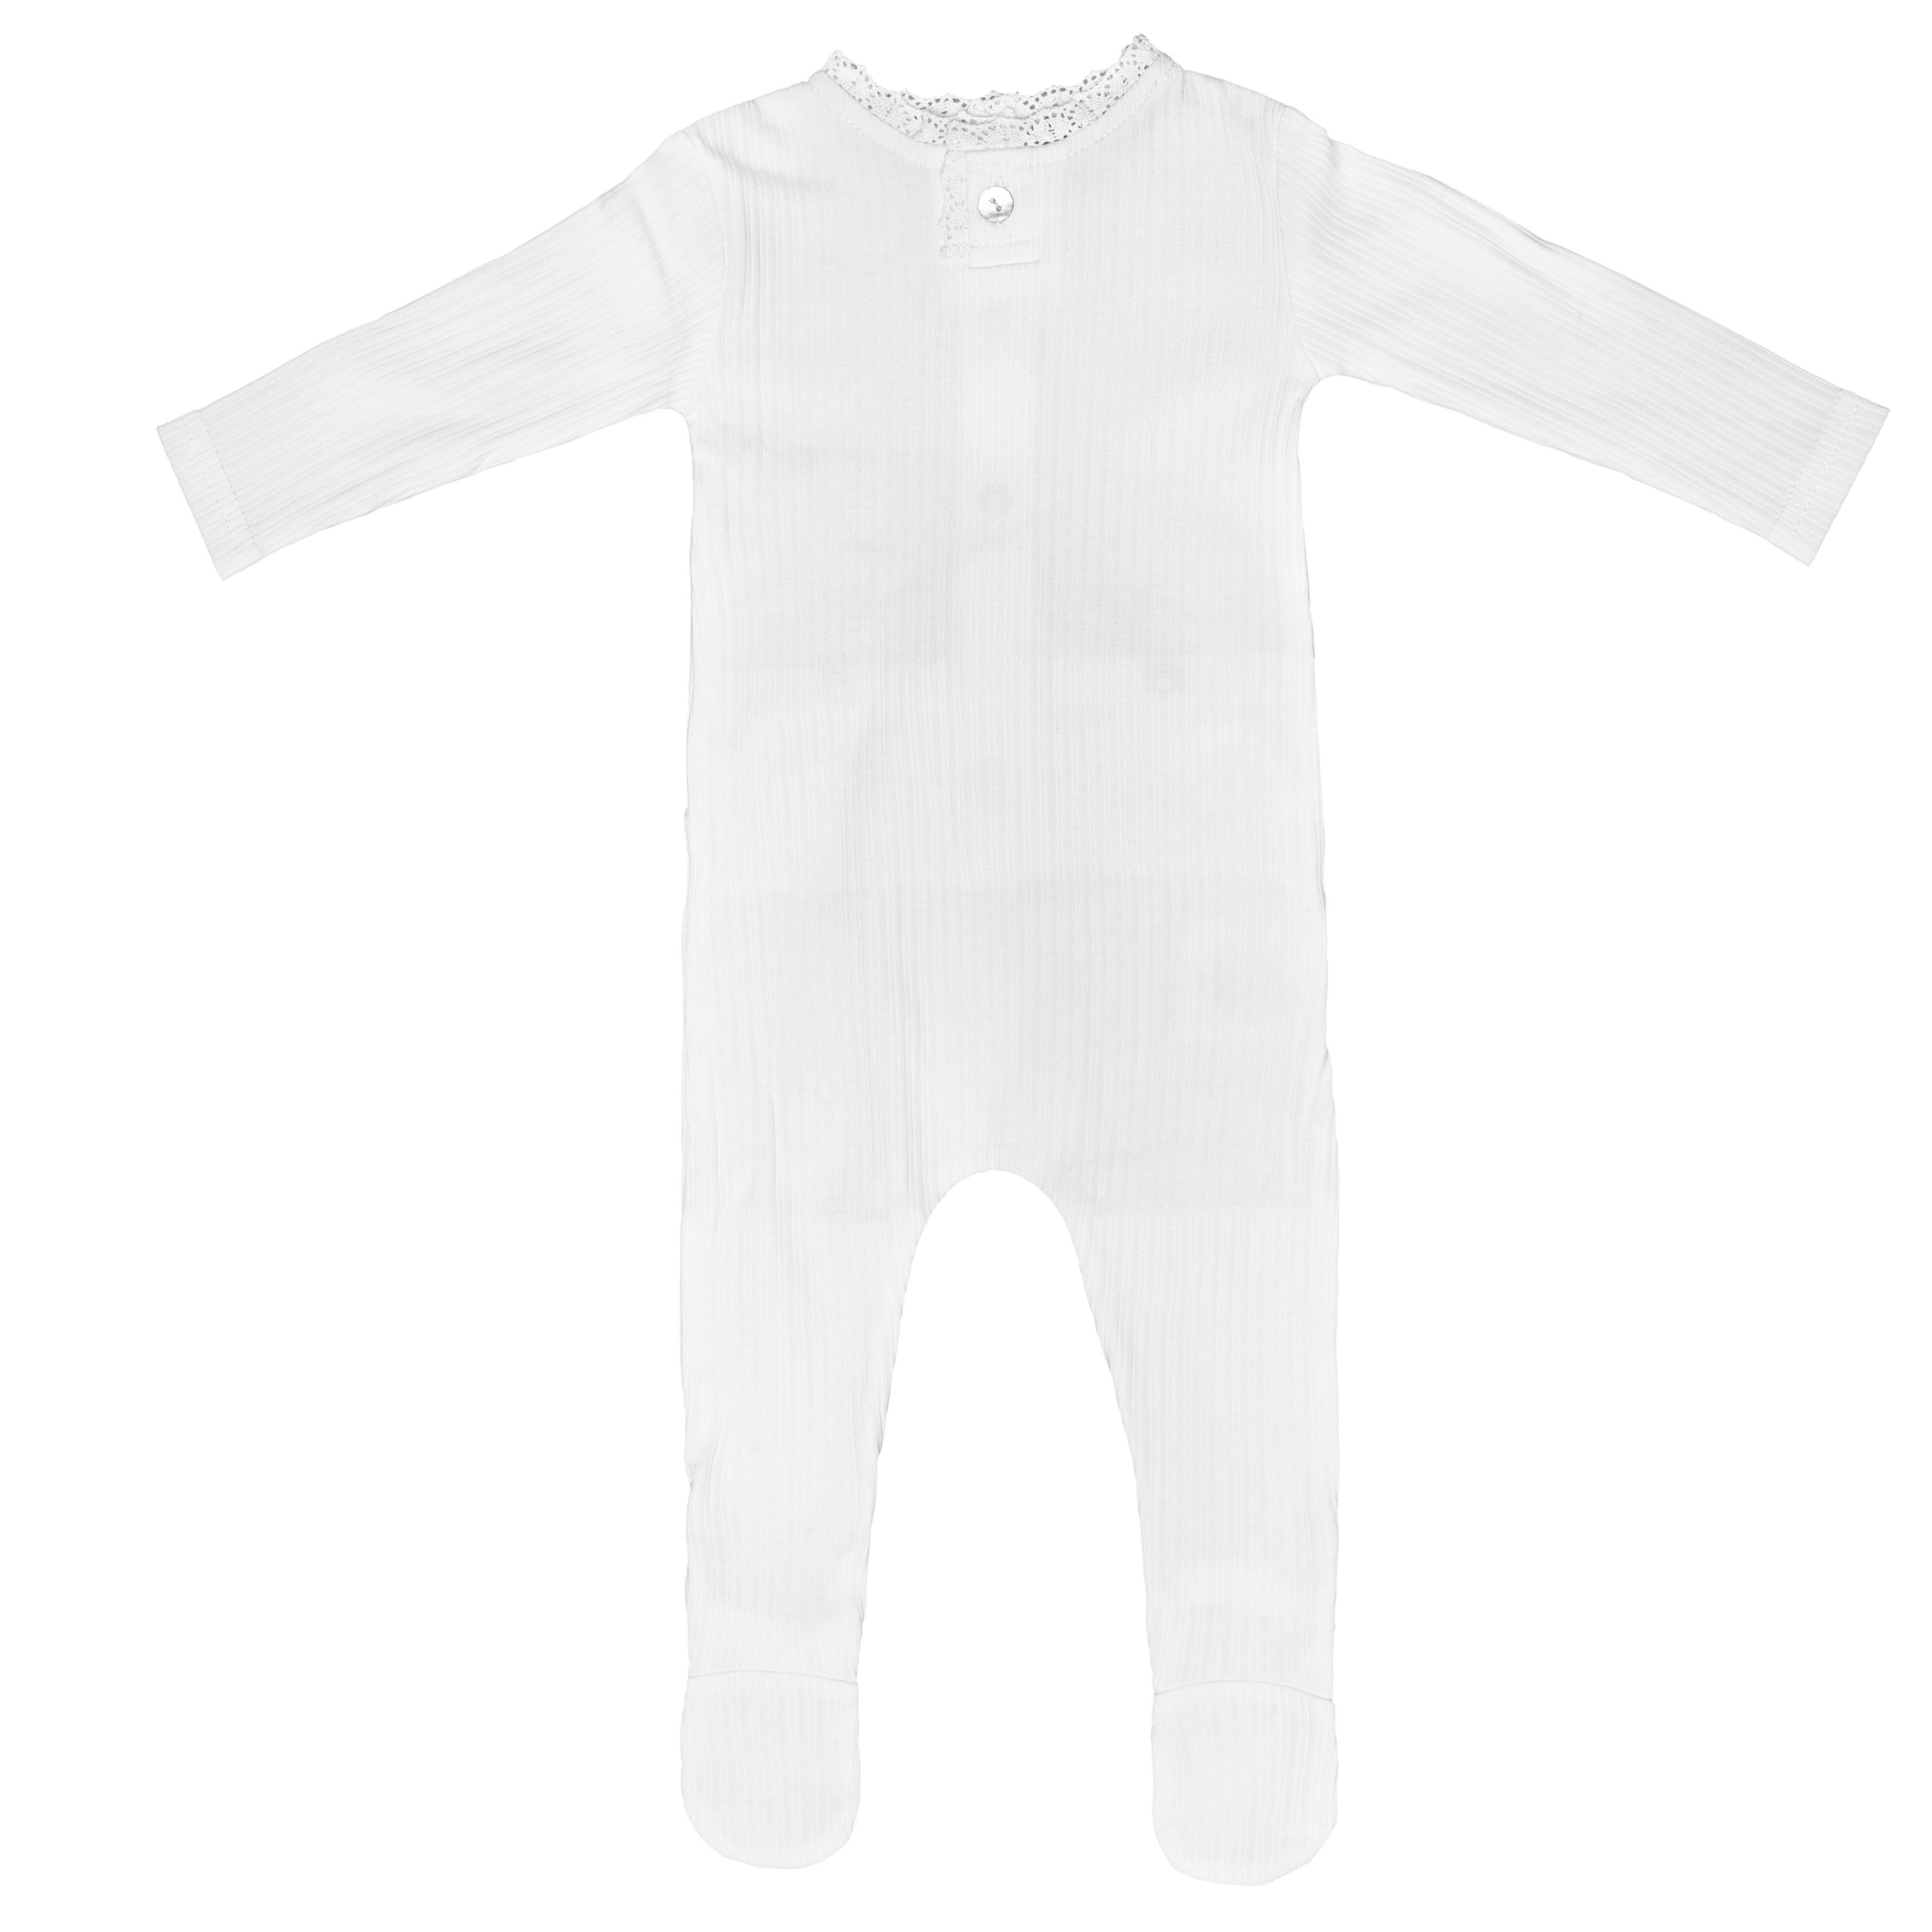 Laced Trim Footie, Ivory Girl